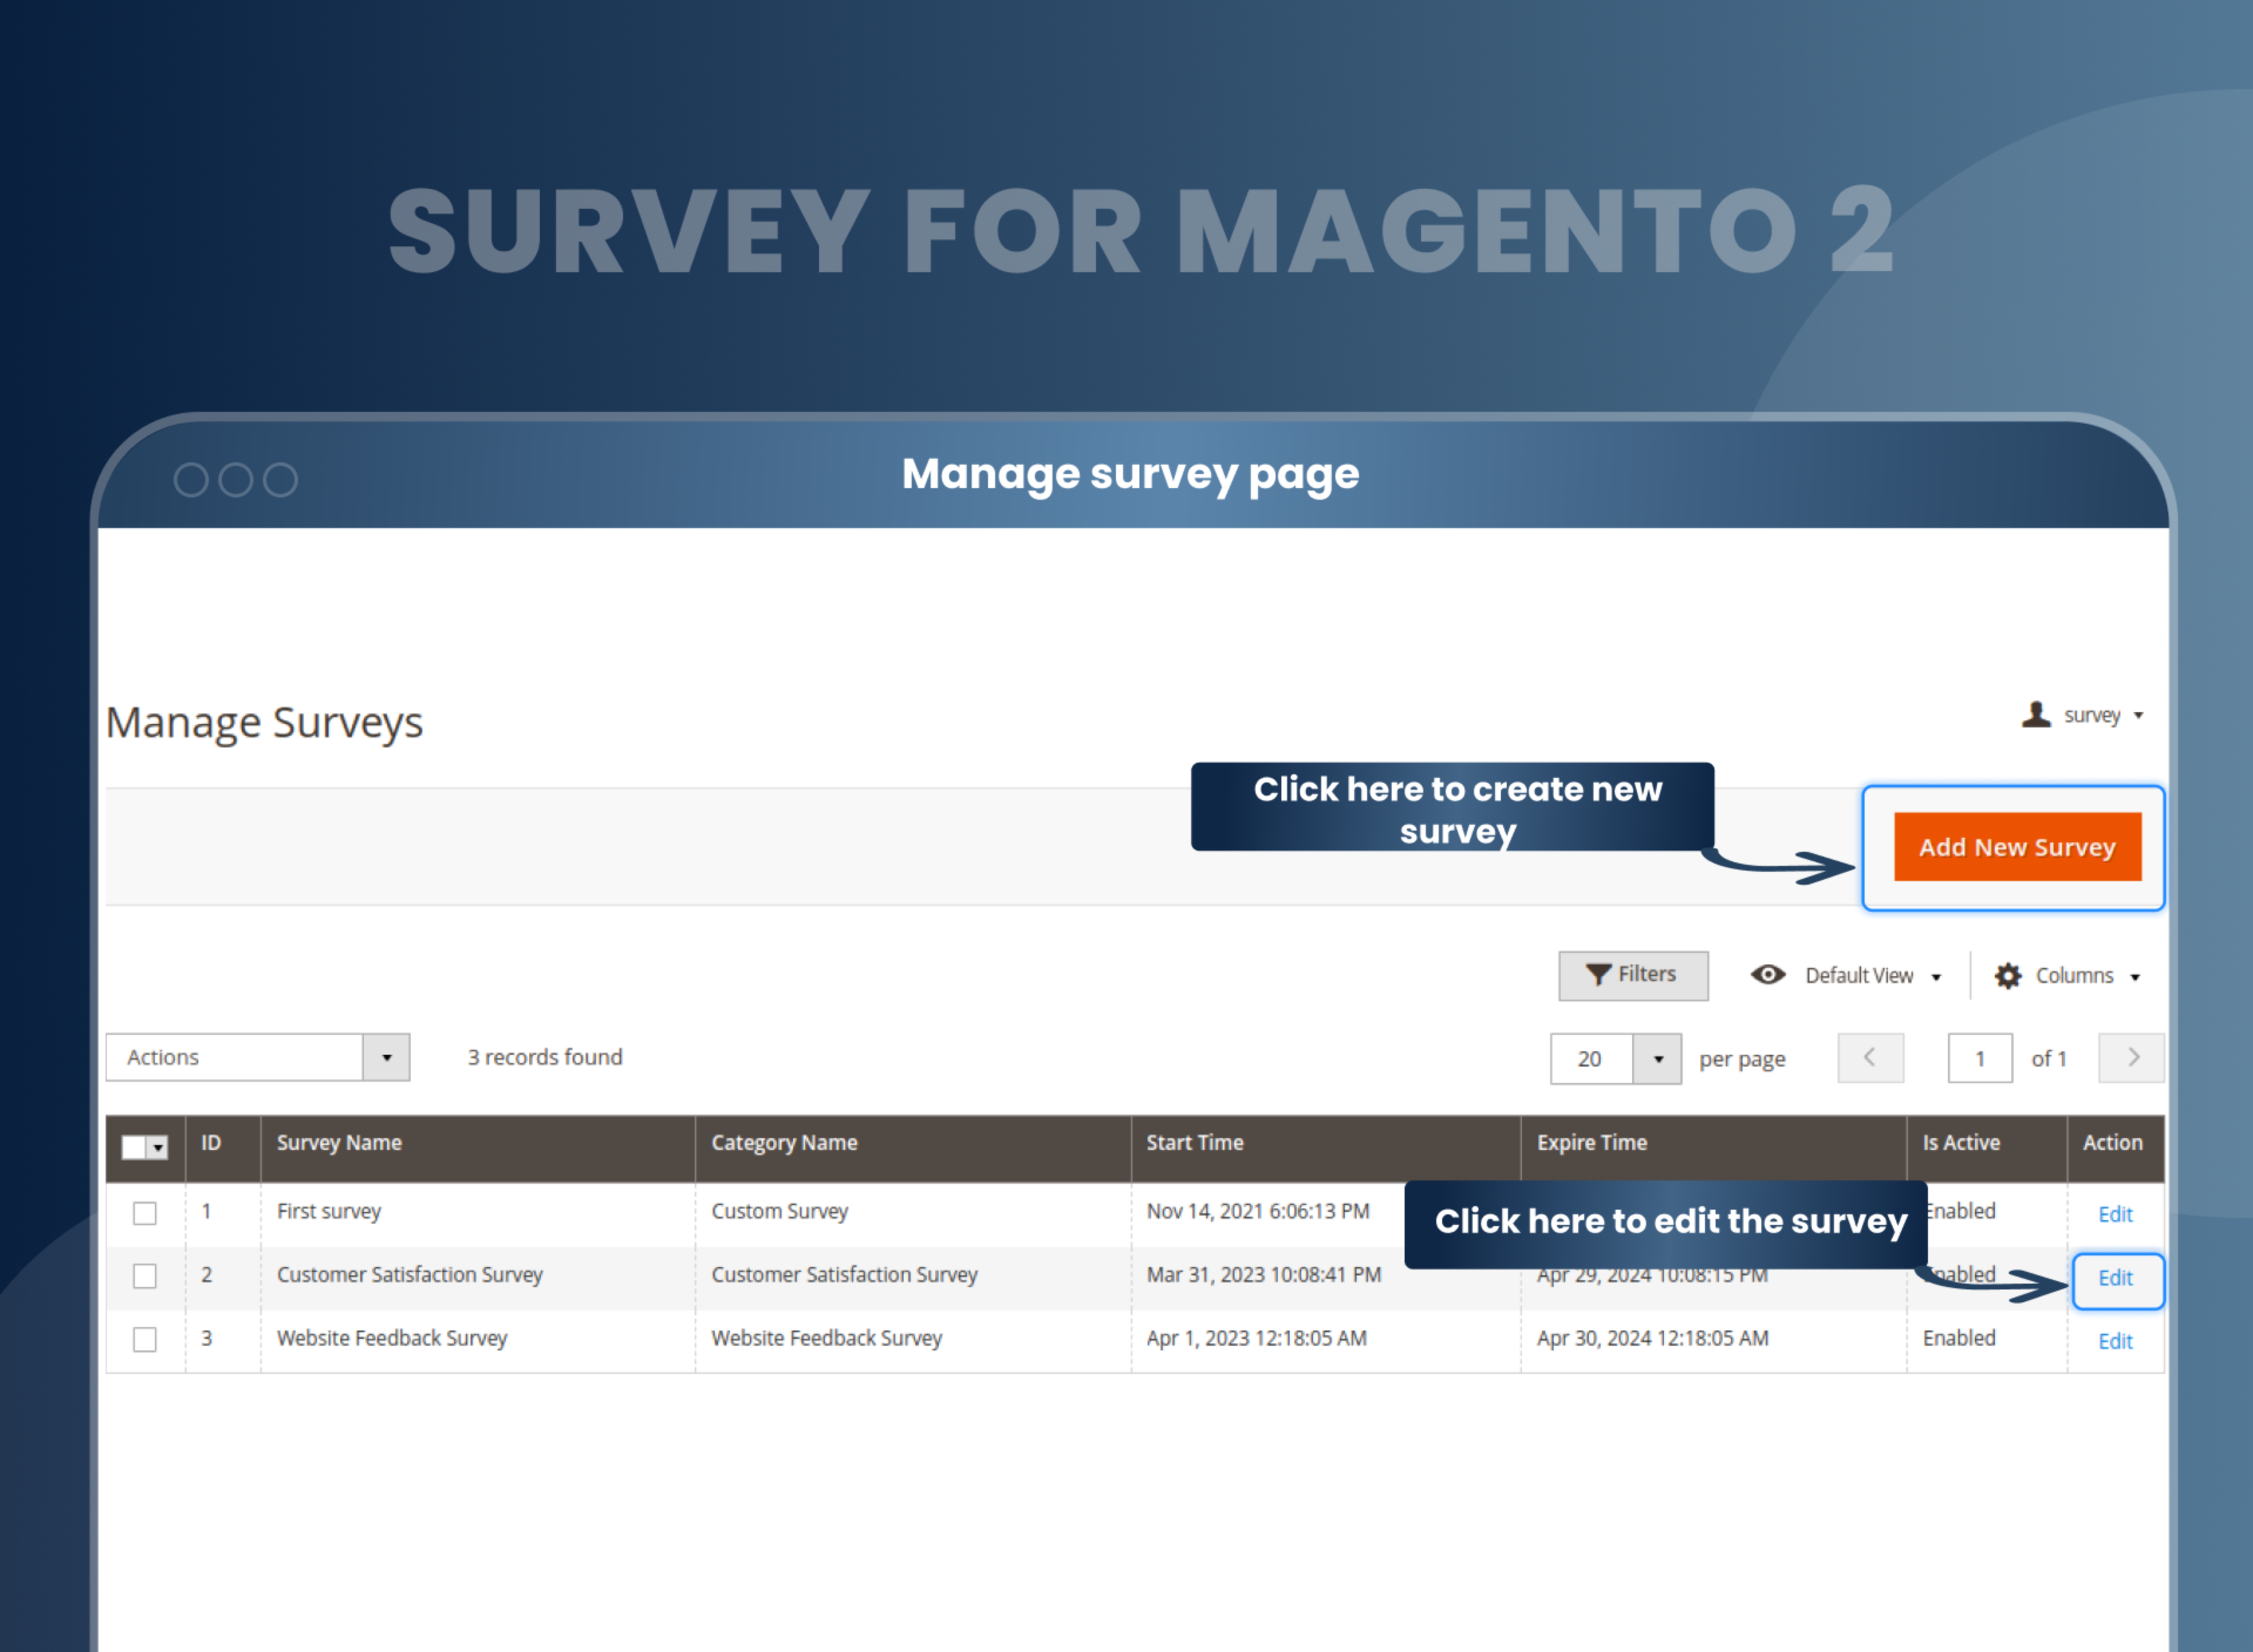 Manage survey page